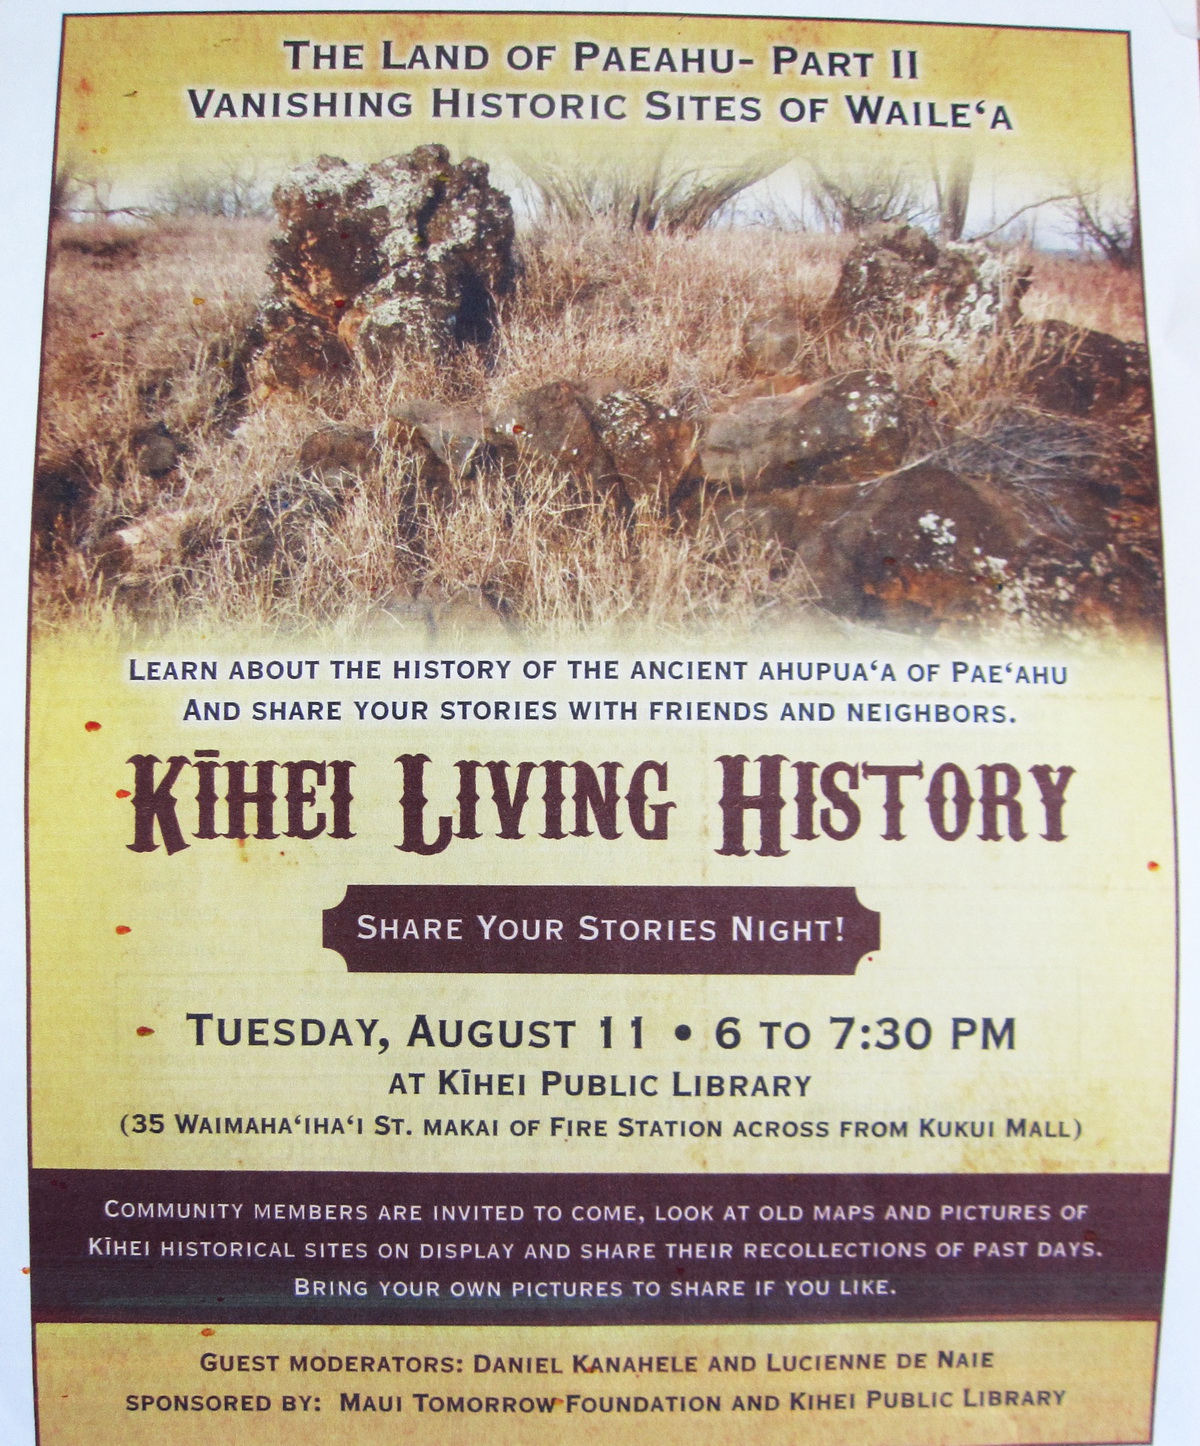 Kihei Living History at the Library on Tuesday Evening